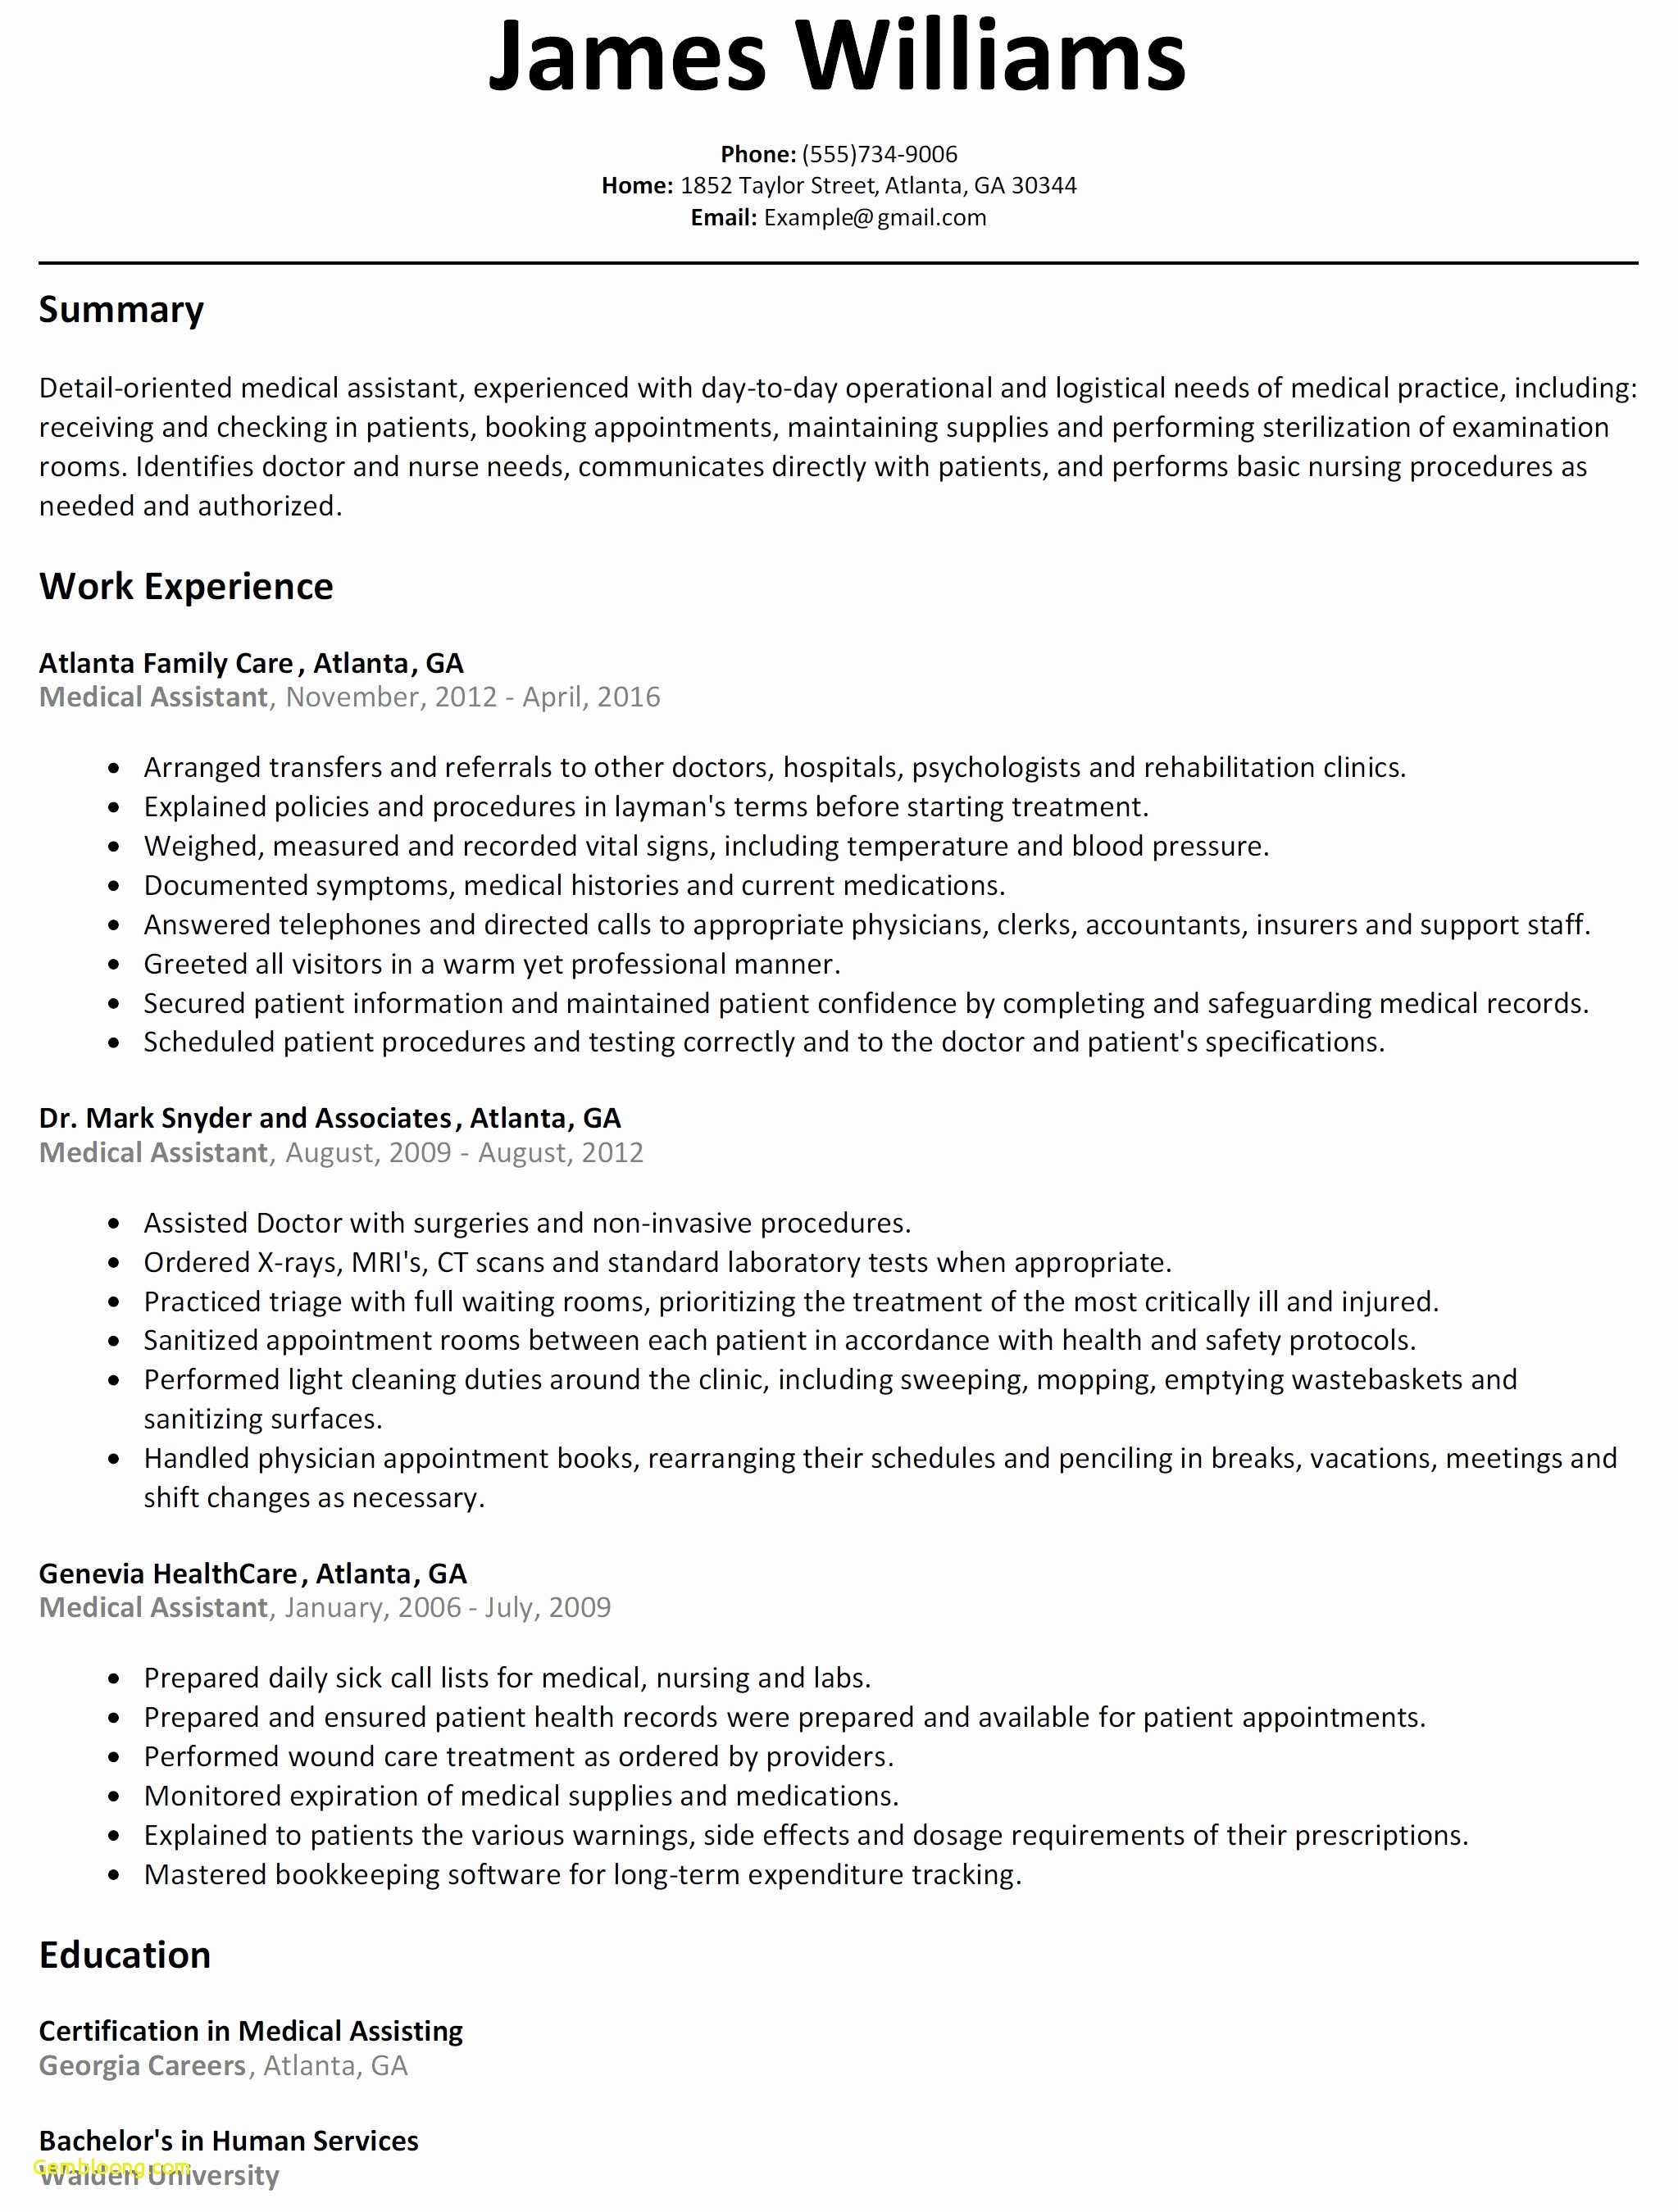 Form W 4 Worksheet as Well as Resume form to Fill Out Myacereporter